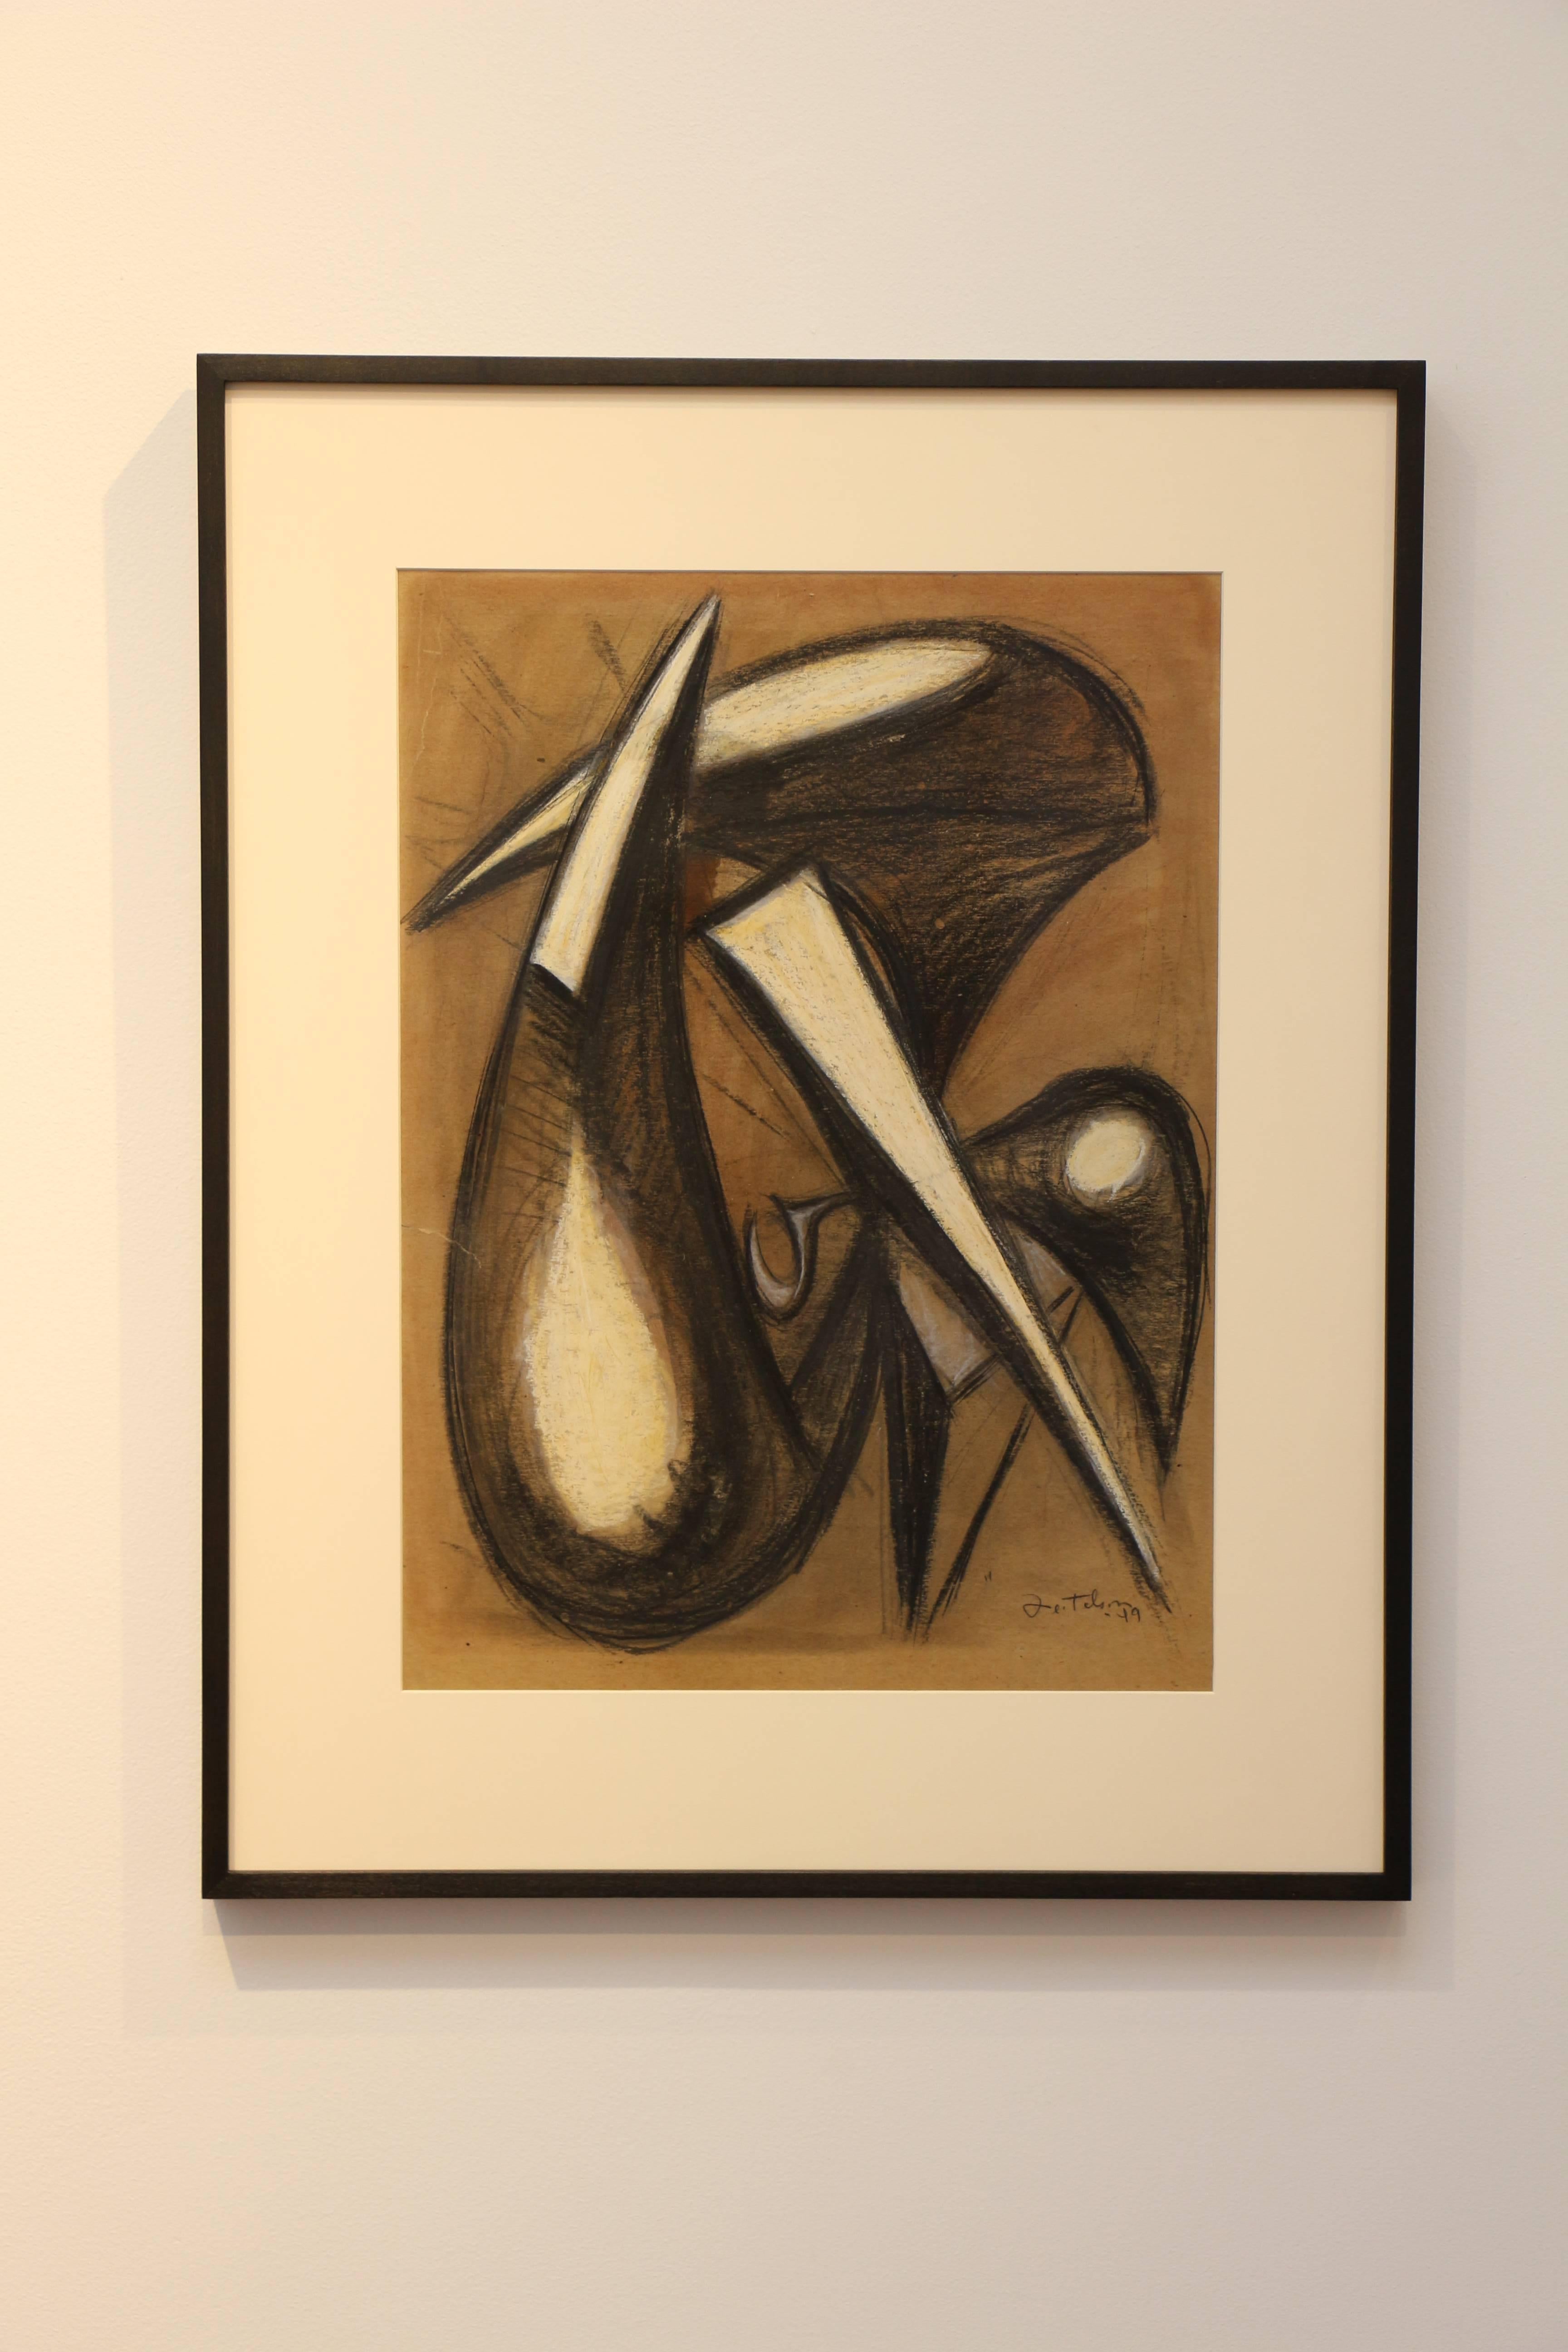 Untitled (Magical Forms: Prometheus), post-surreal drawing with morphing forms - Art by Lorser Feitelson